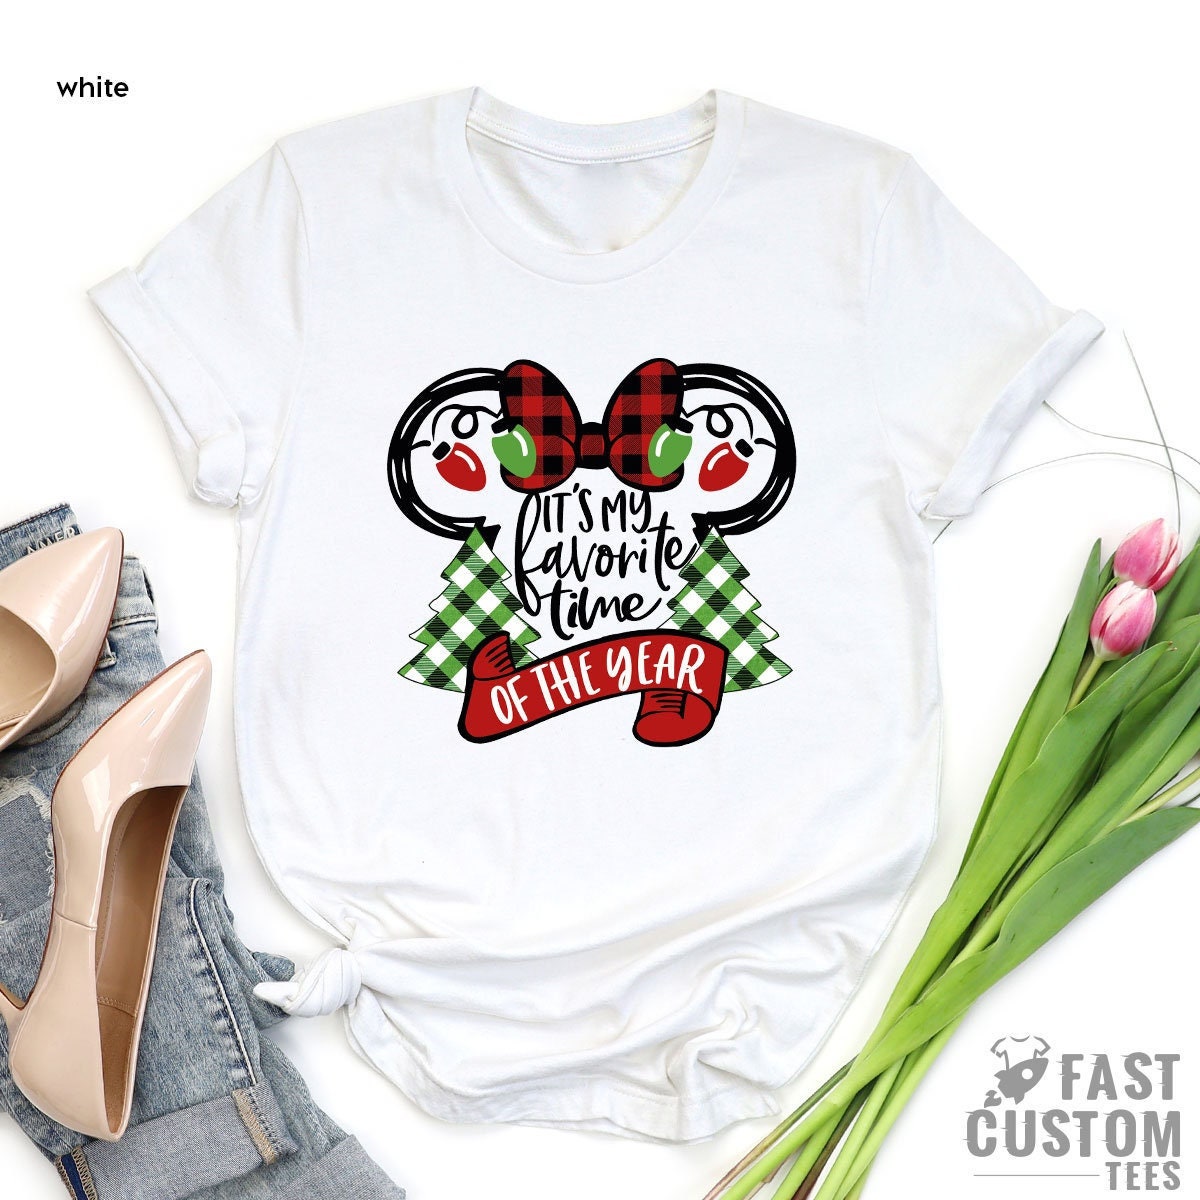 It's My Favorite Time of the Year, Christmas Shirts for Women, Christmas T-Shirt, Christmas Tee, Cute Christmas Shirts, Family Merry Shirt - Fastdeliverytees.com